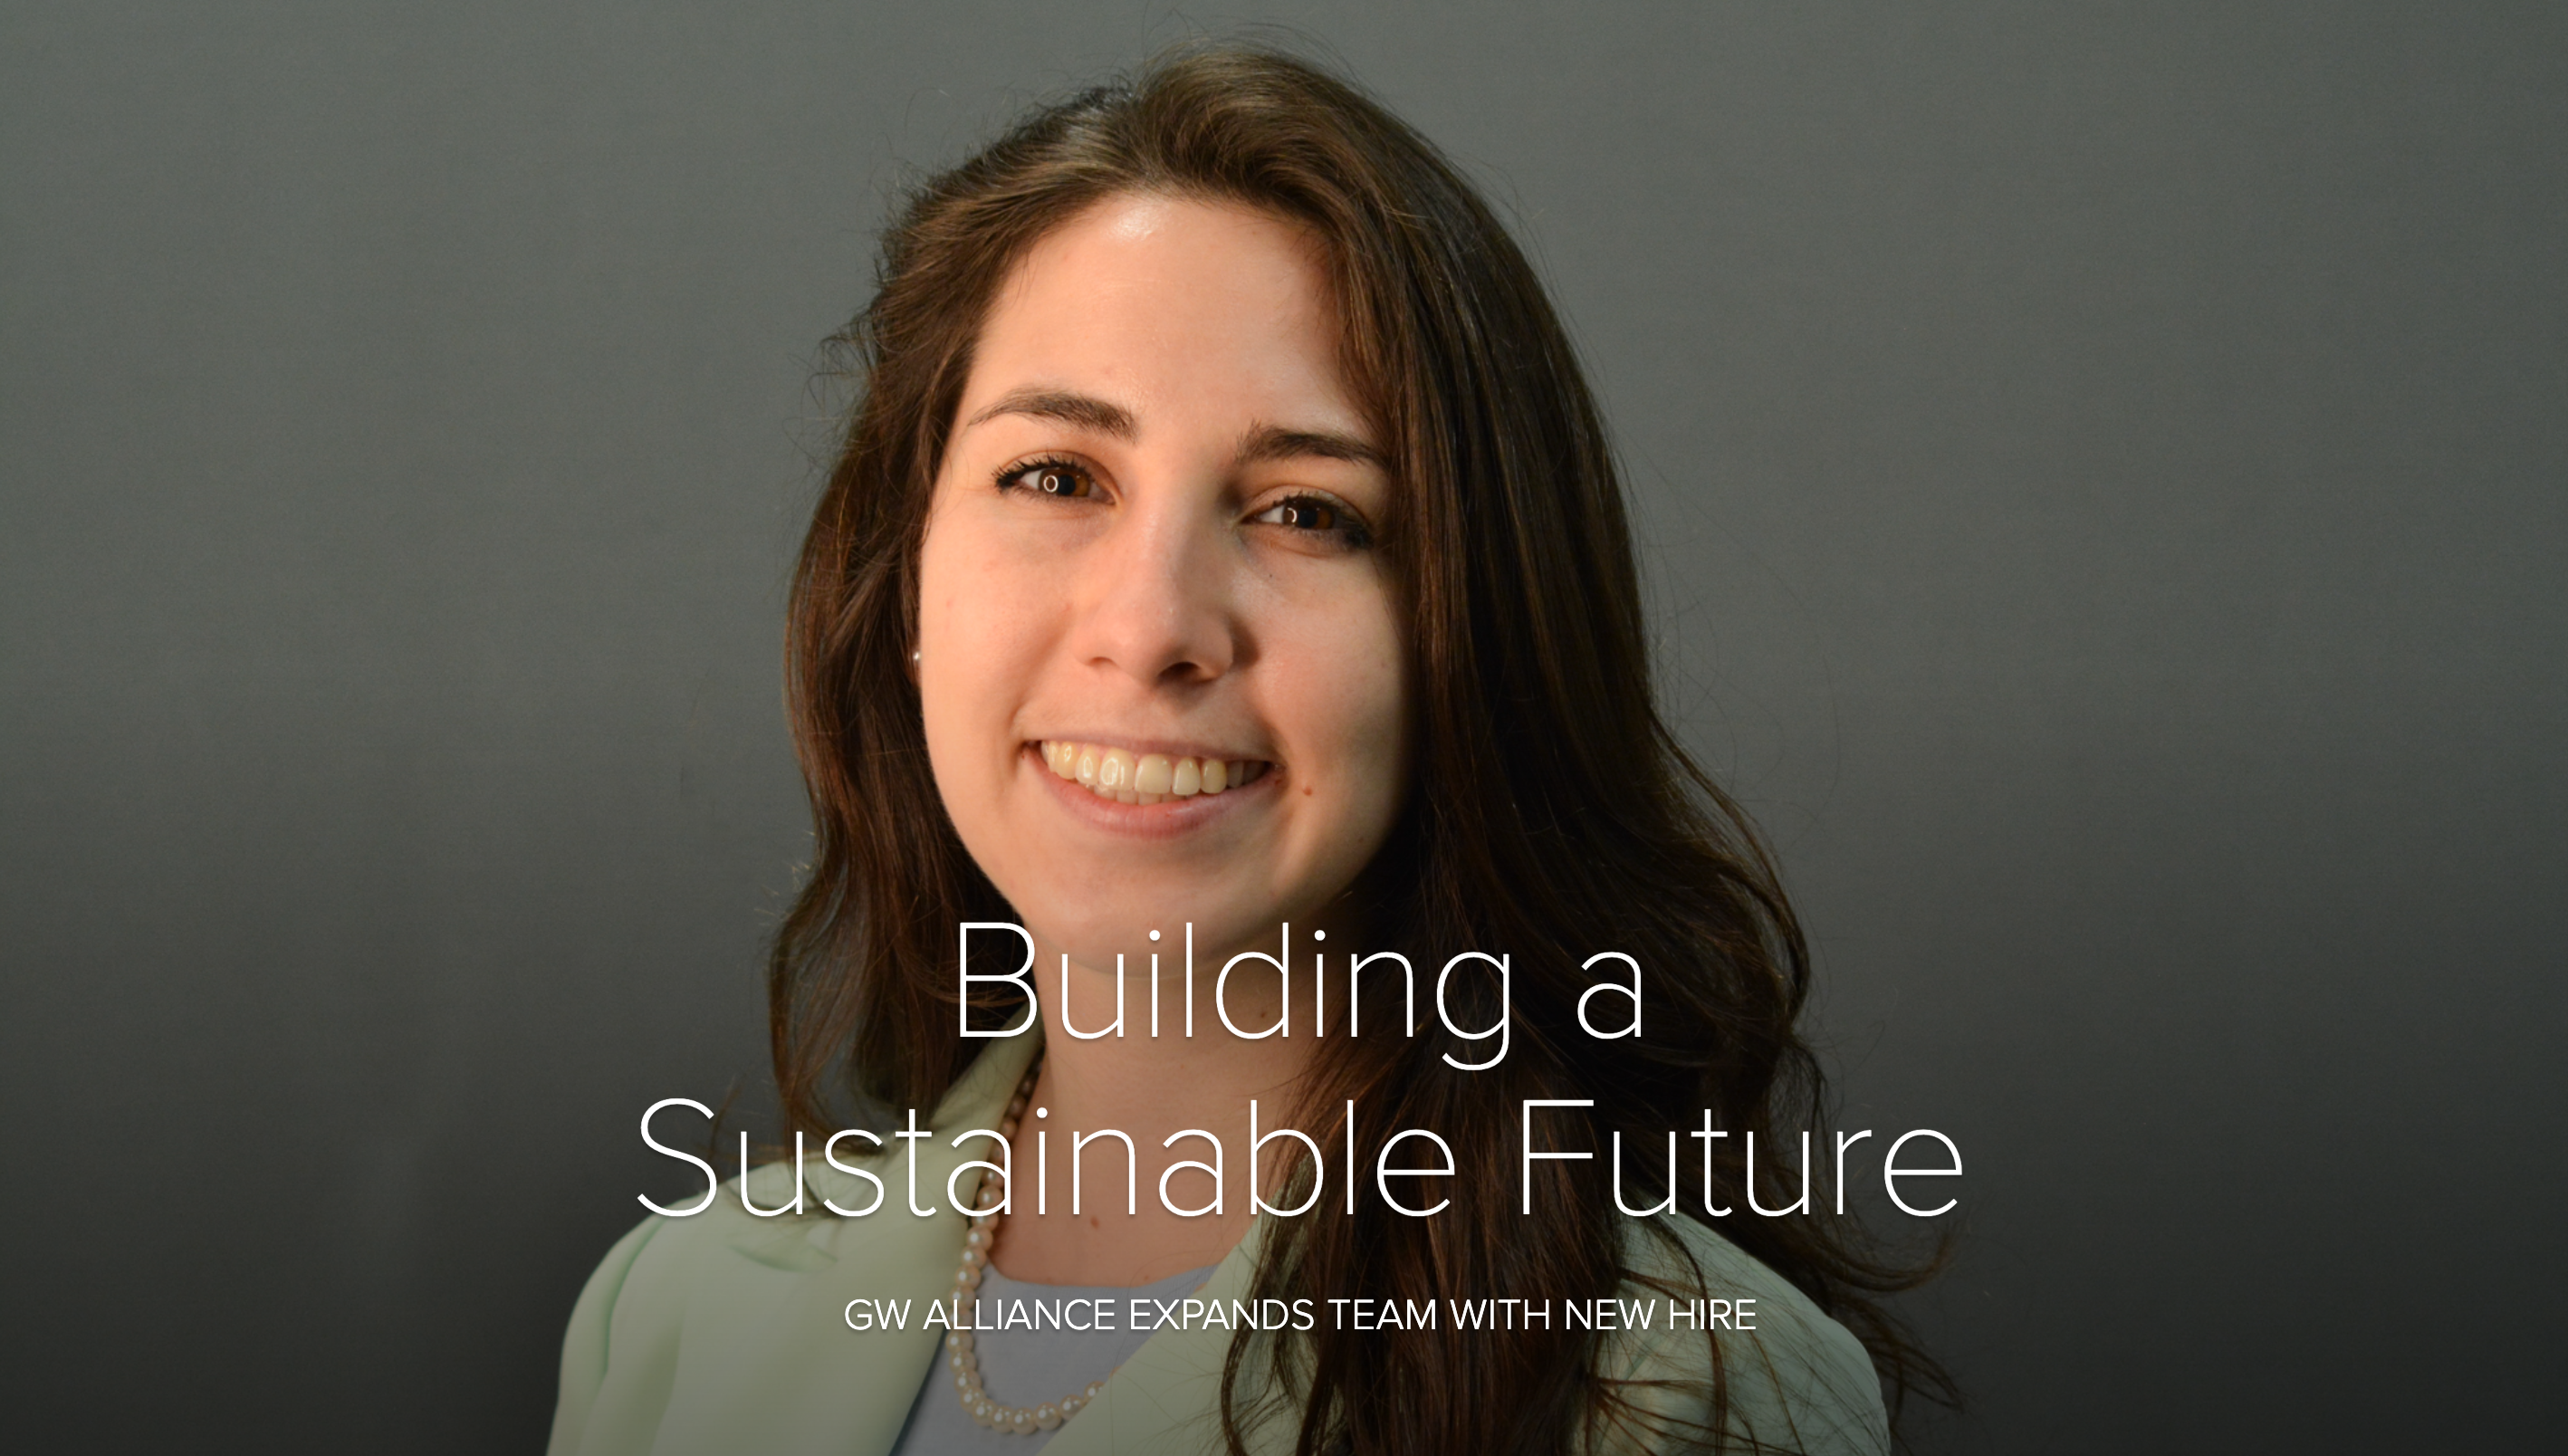 A headshot of Angela Melidosian with the text "Building a sustainable future: GW Alliance expands team with new hire"